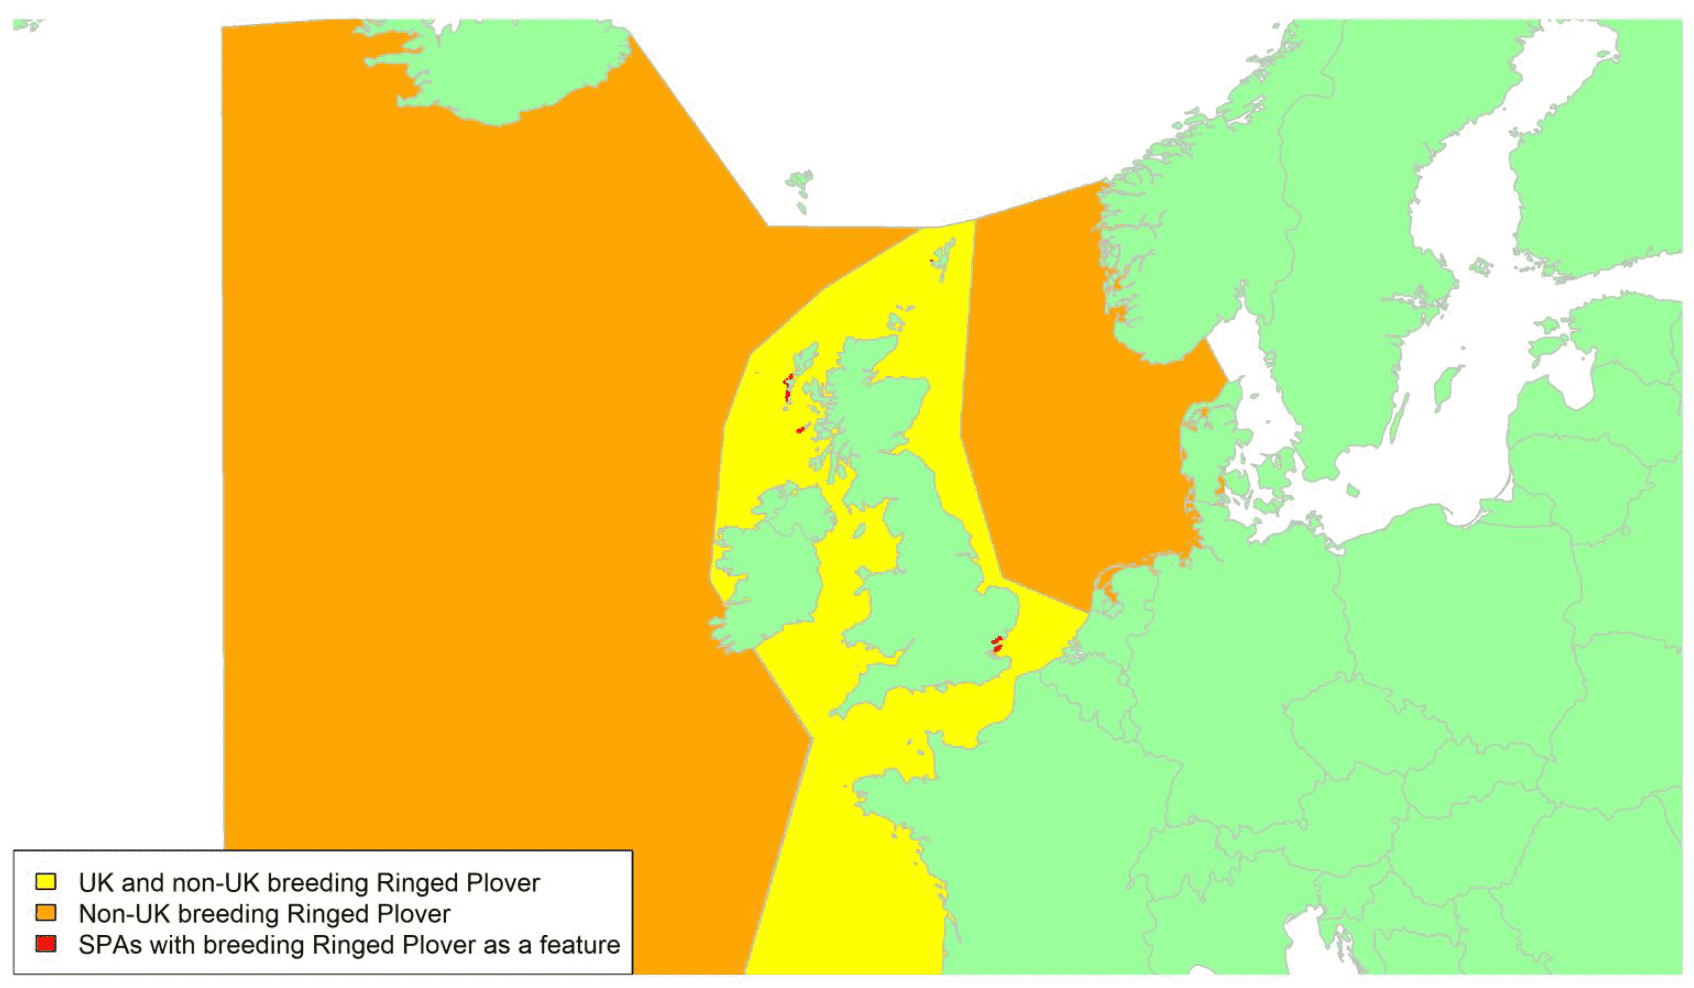 Map of North West Europe showing migratory routes and SPAs within the UK for breeding Ringed Plover as described in the text below.